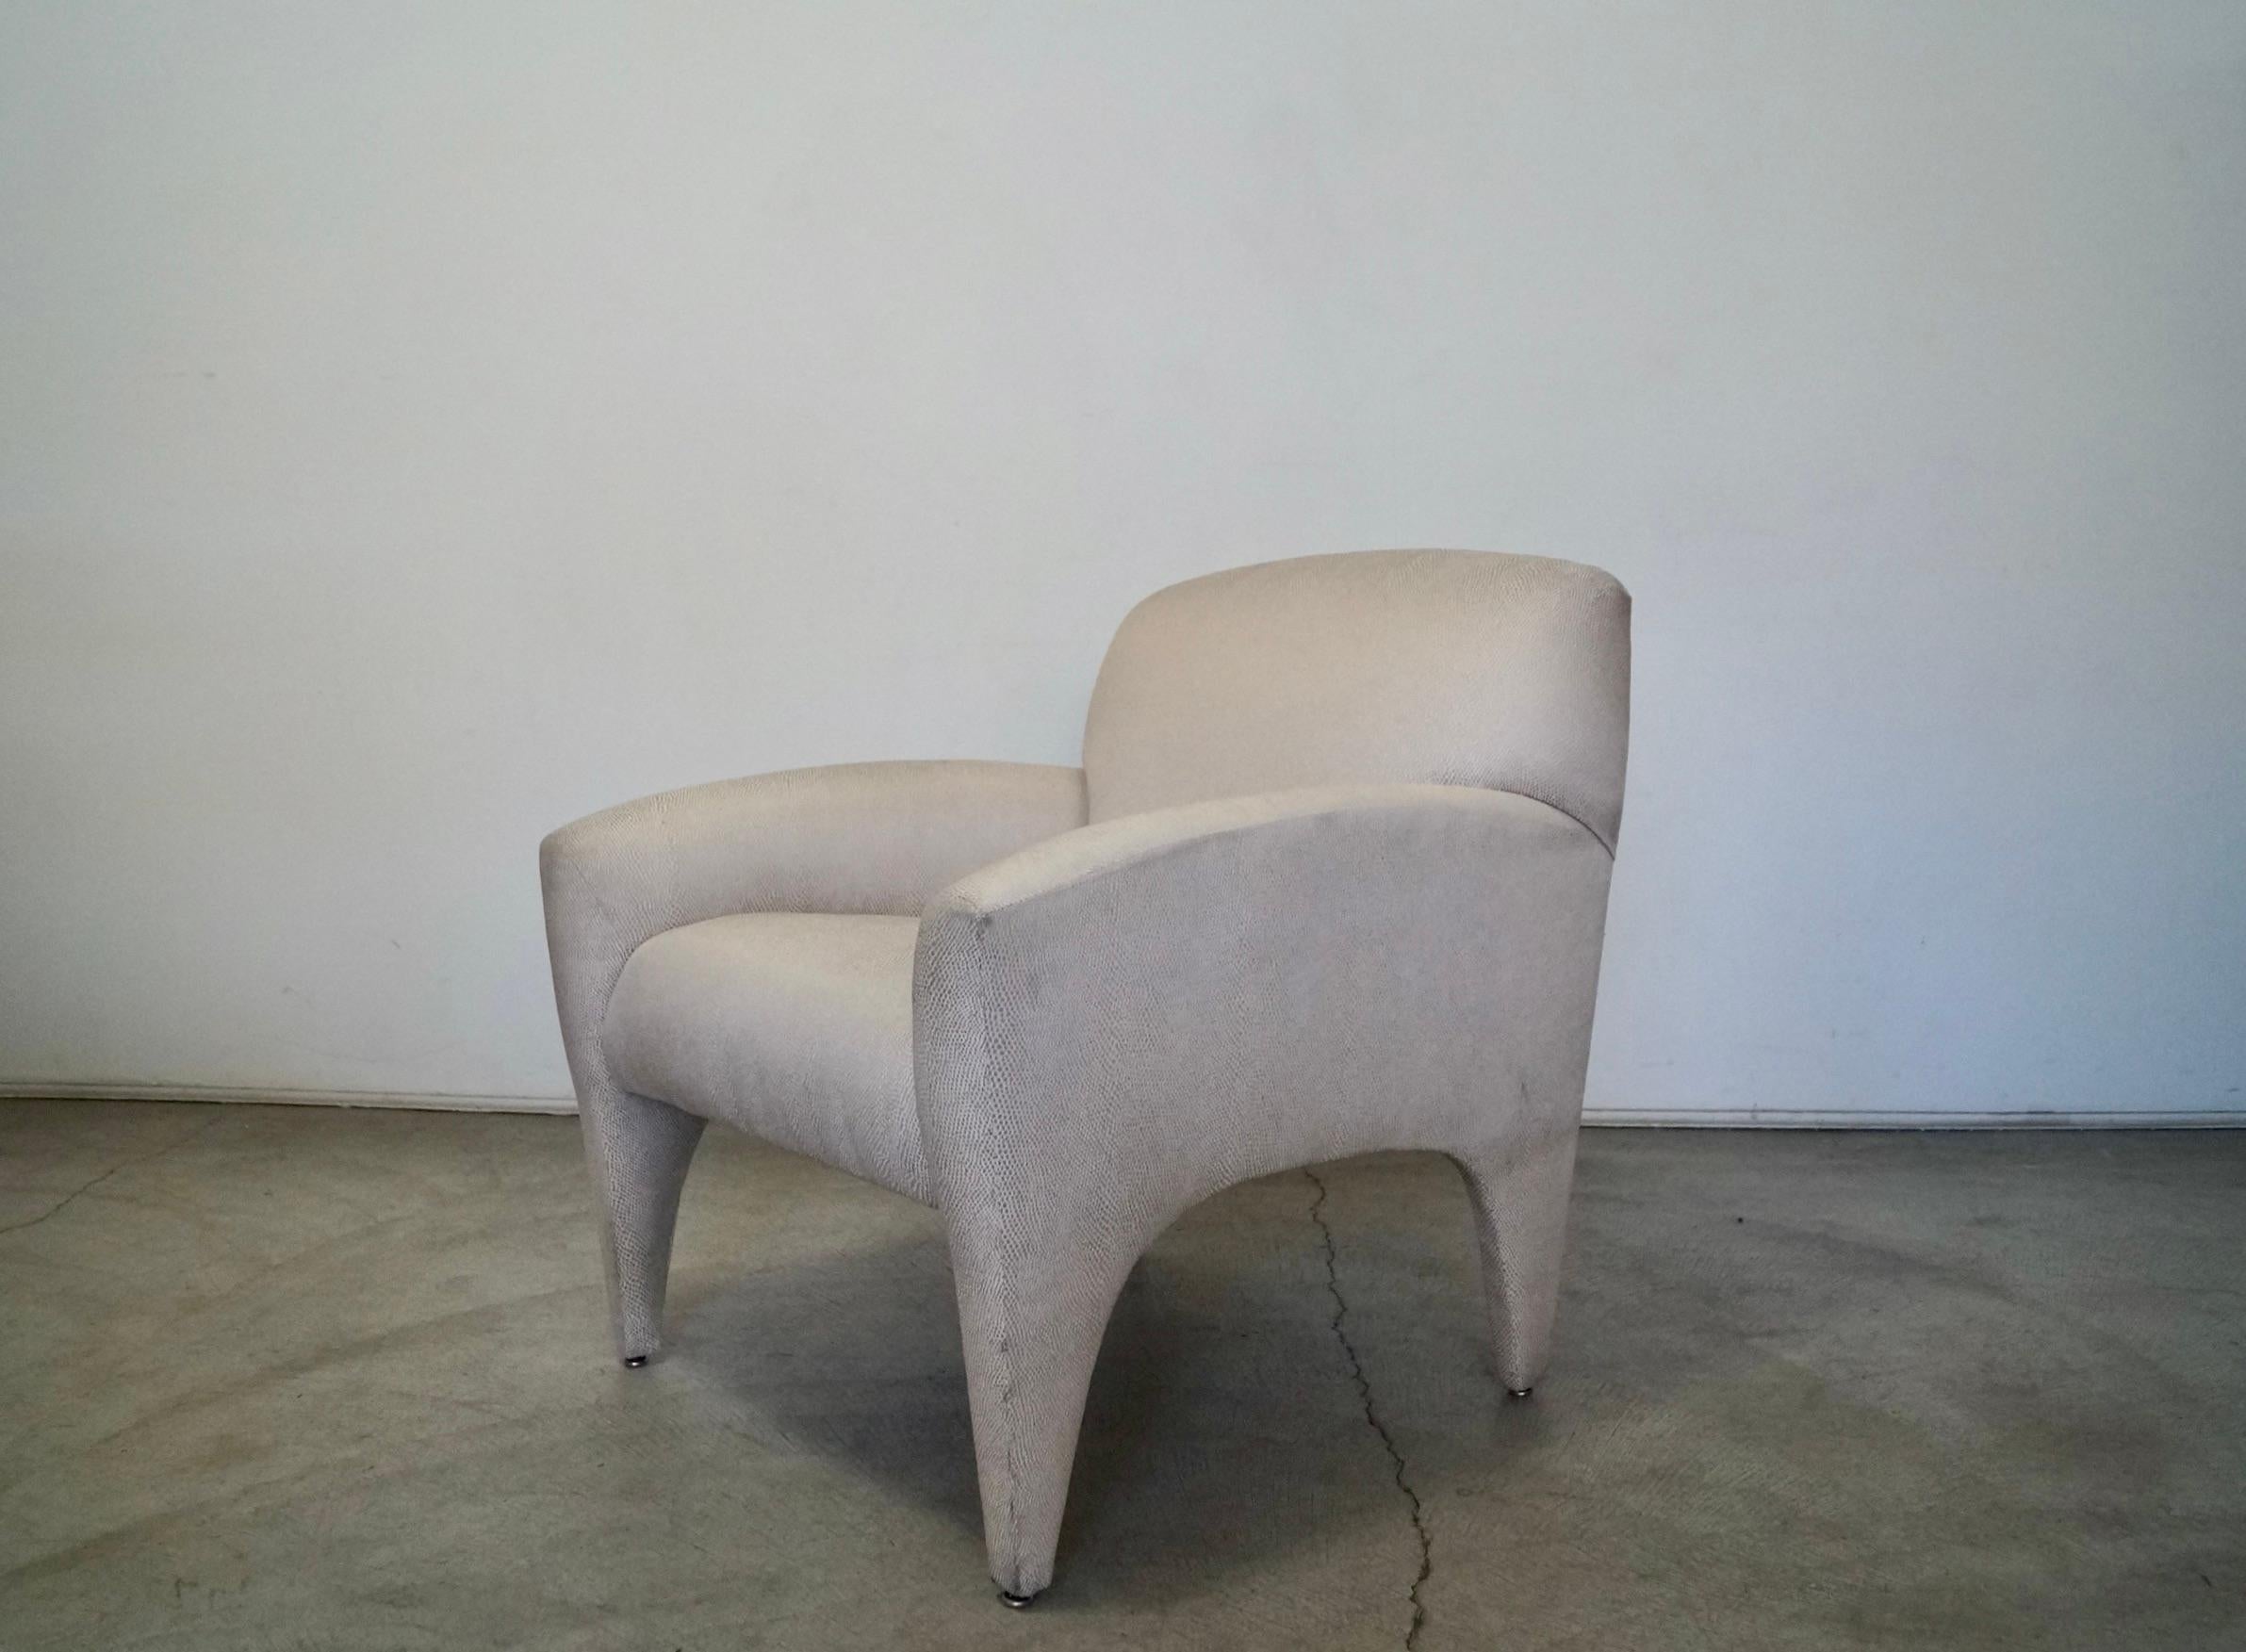 1980s Postmodern Vladmir Kagan Armchair In Distressed Condition For Sale In Burbank, CA